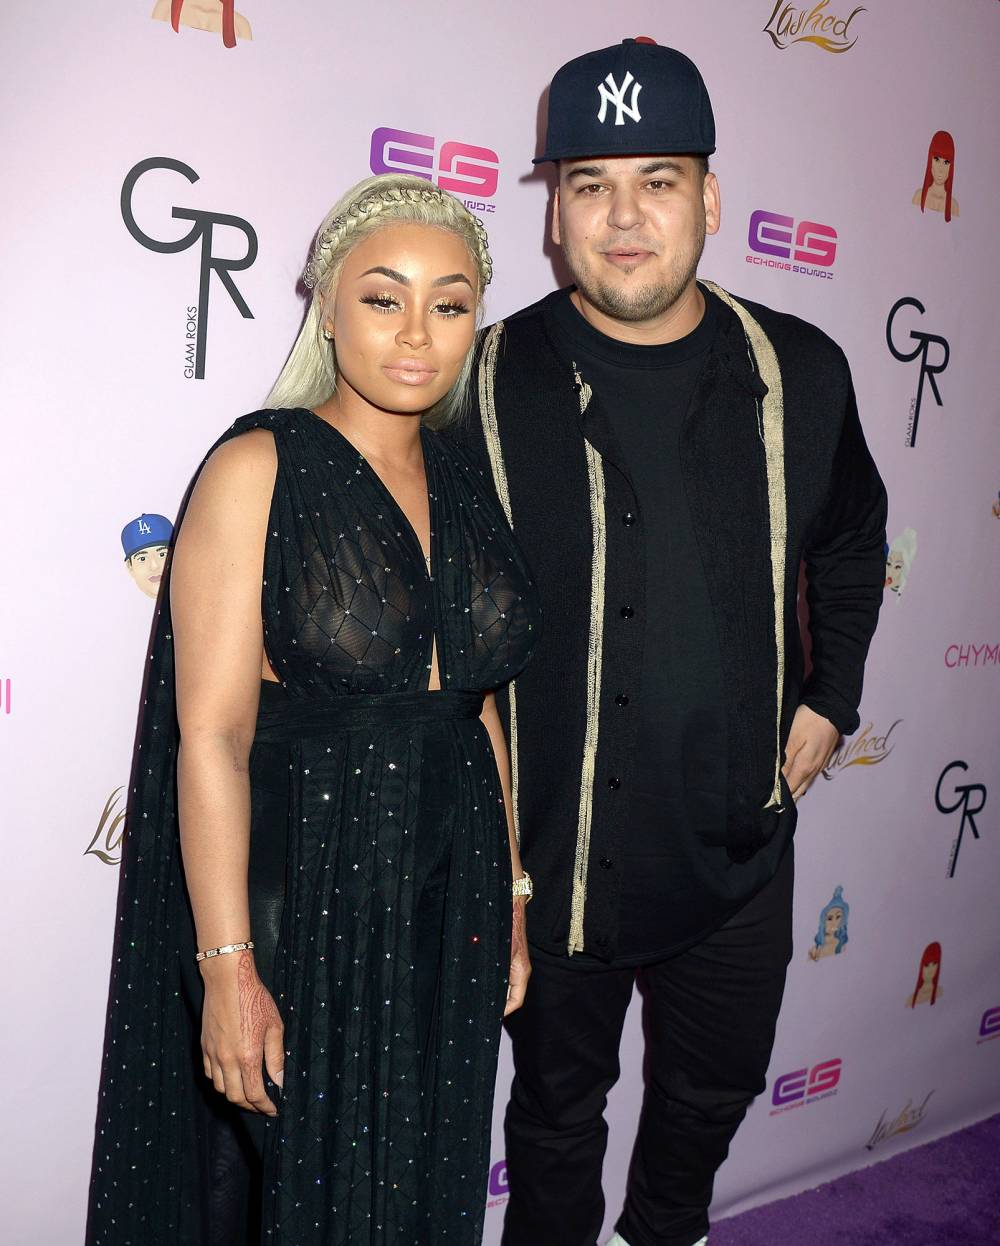 Rob Kardashian Was 'Puffy and Red' After 2016 Blac Chyna Fight, Says Kim